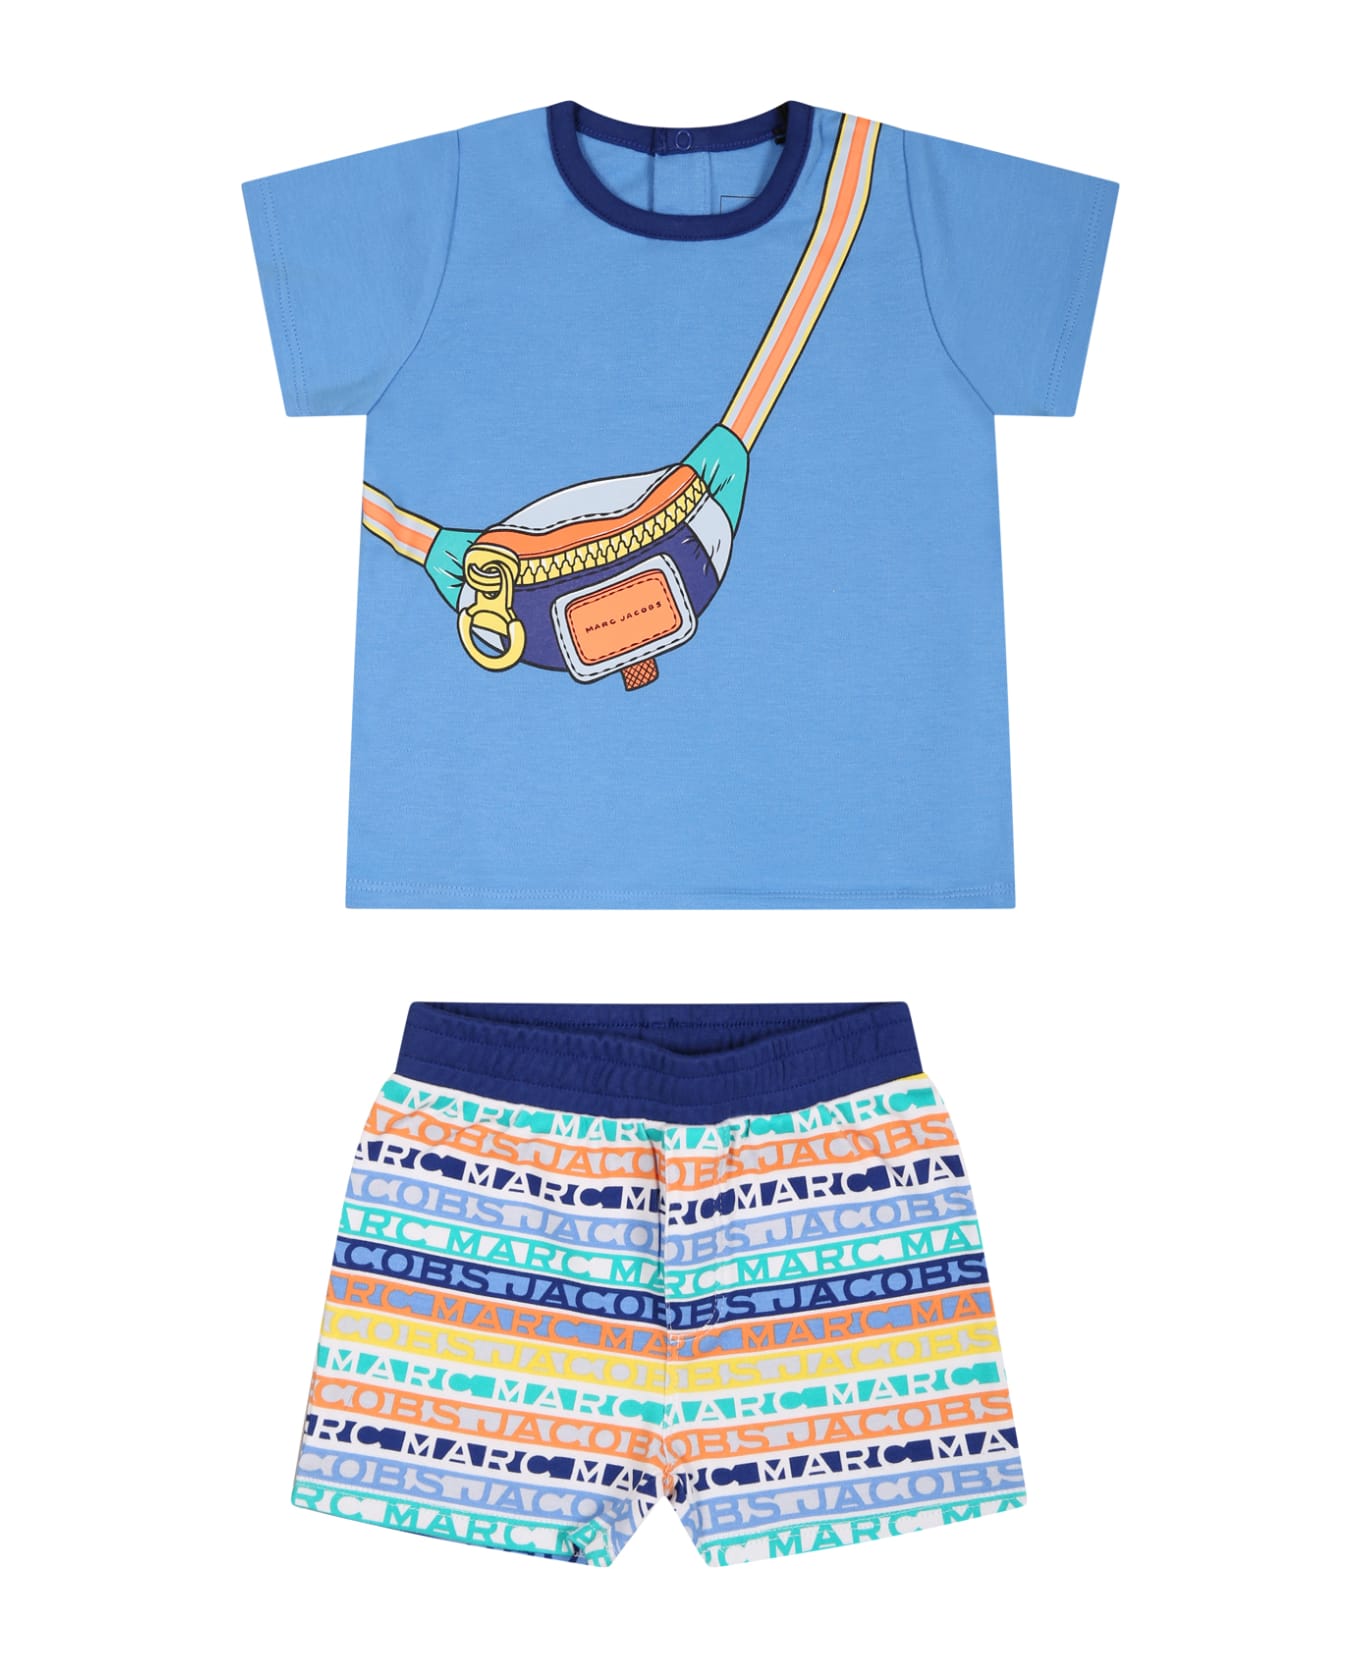 Marc Jacobs Multicolor Outfit For Baby Boy With Print And Logo - Multicolor